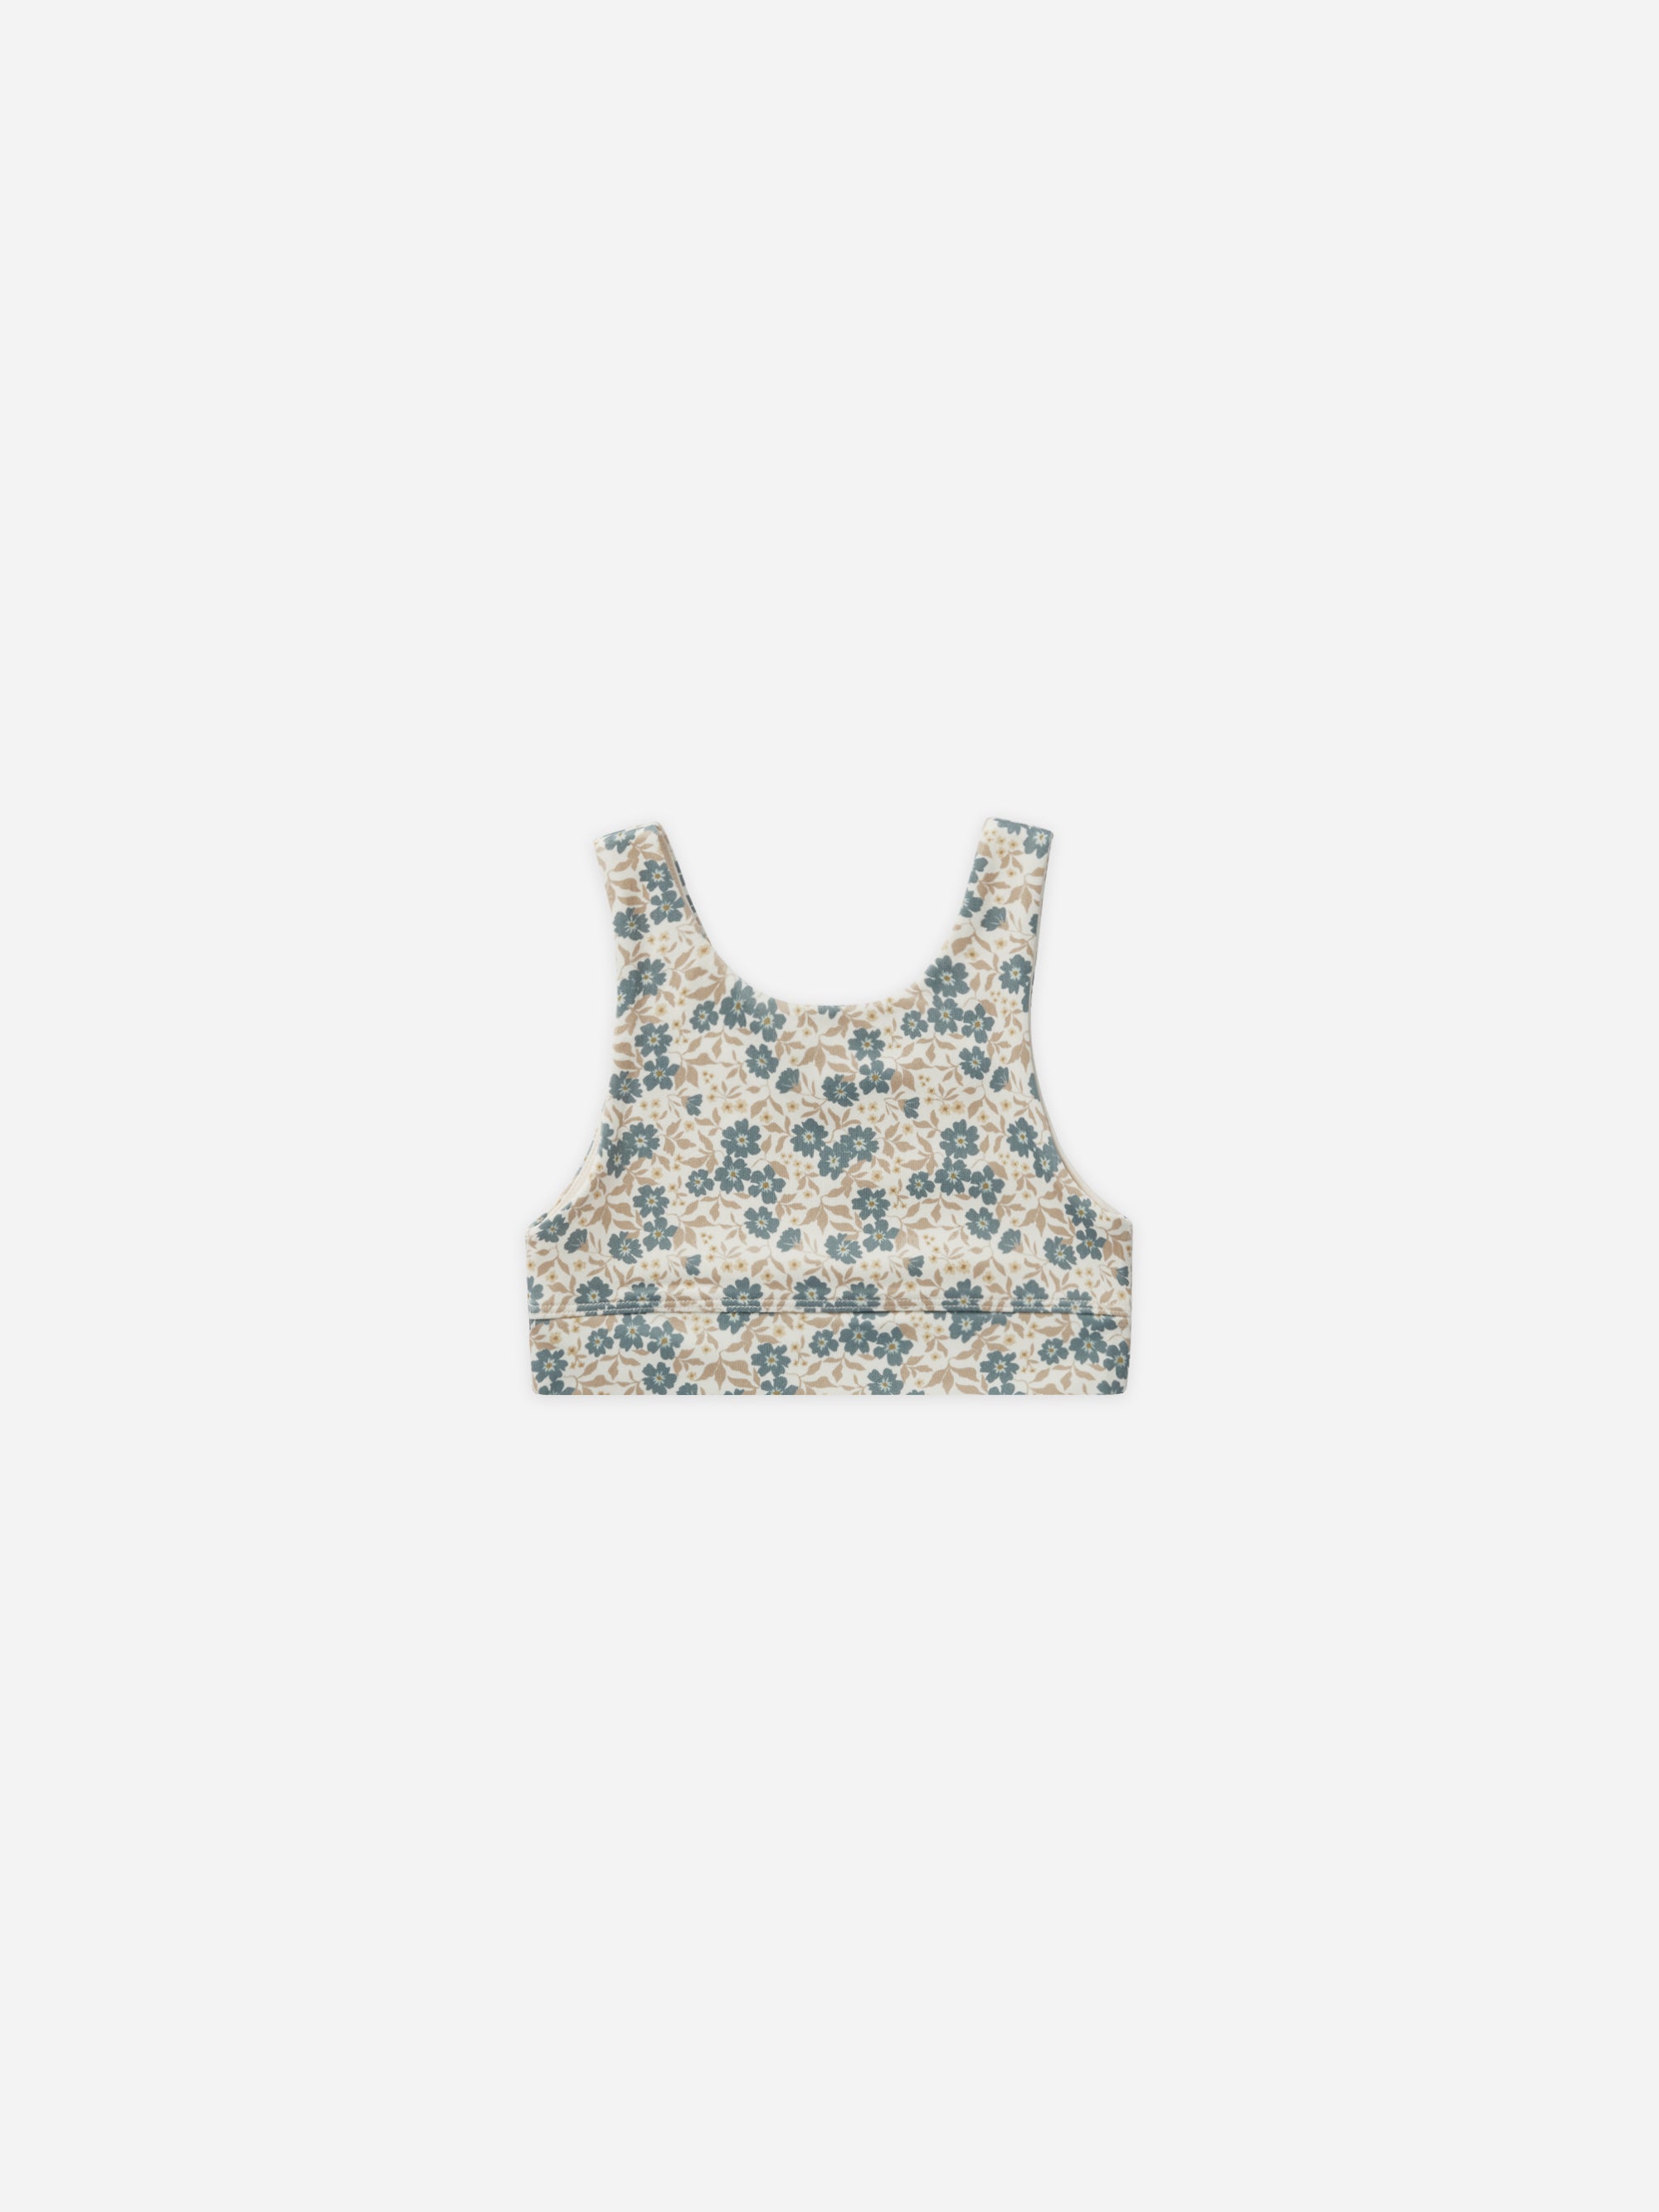 Swift Sports Bra || Blue Ditsy - Rylee + Cru | Kids Clothes | Trendy Baby Clothes | Modern Infant Outfits |